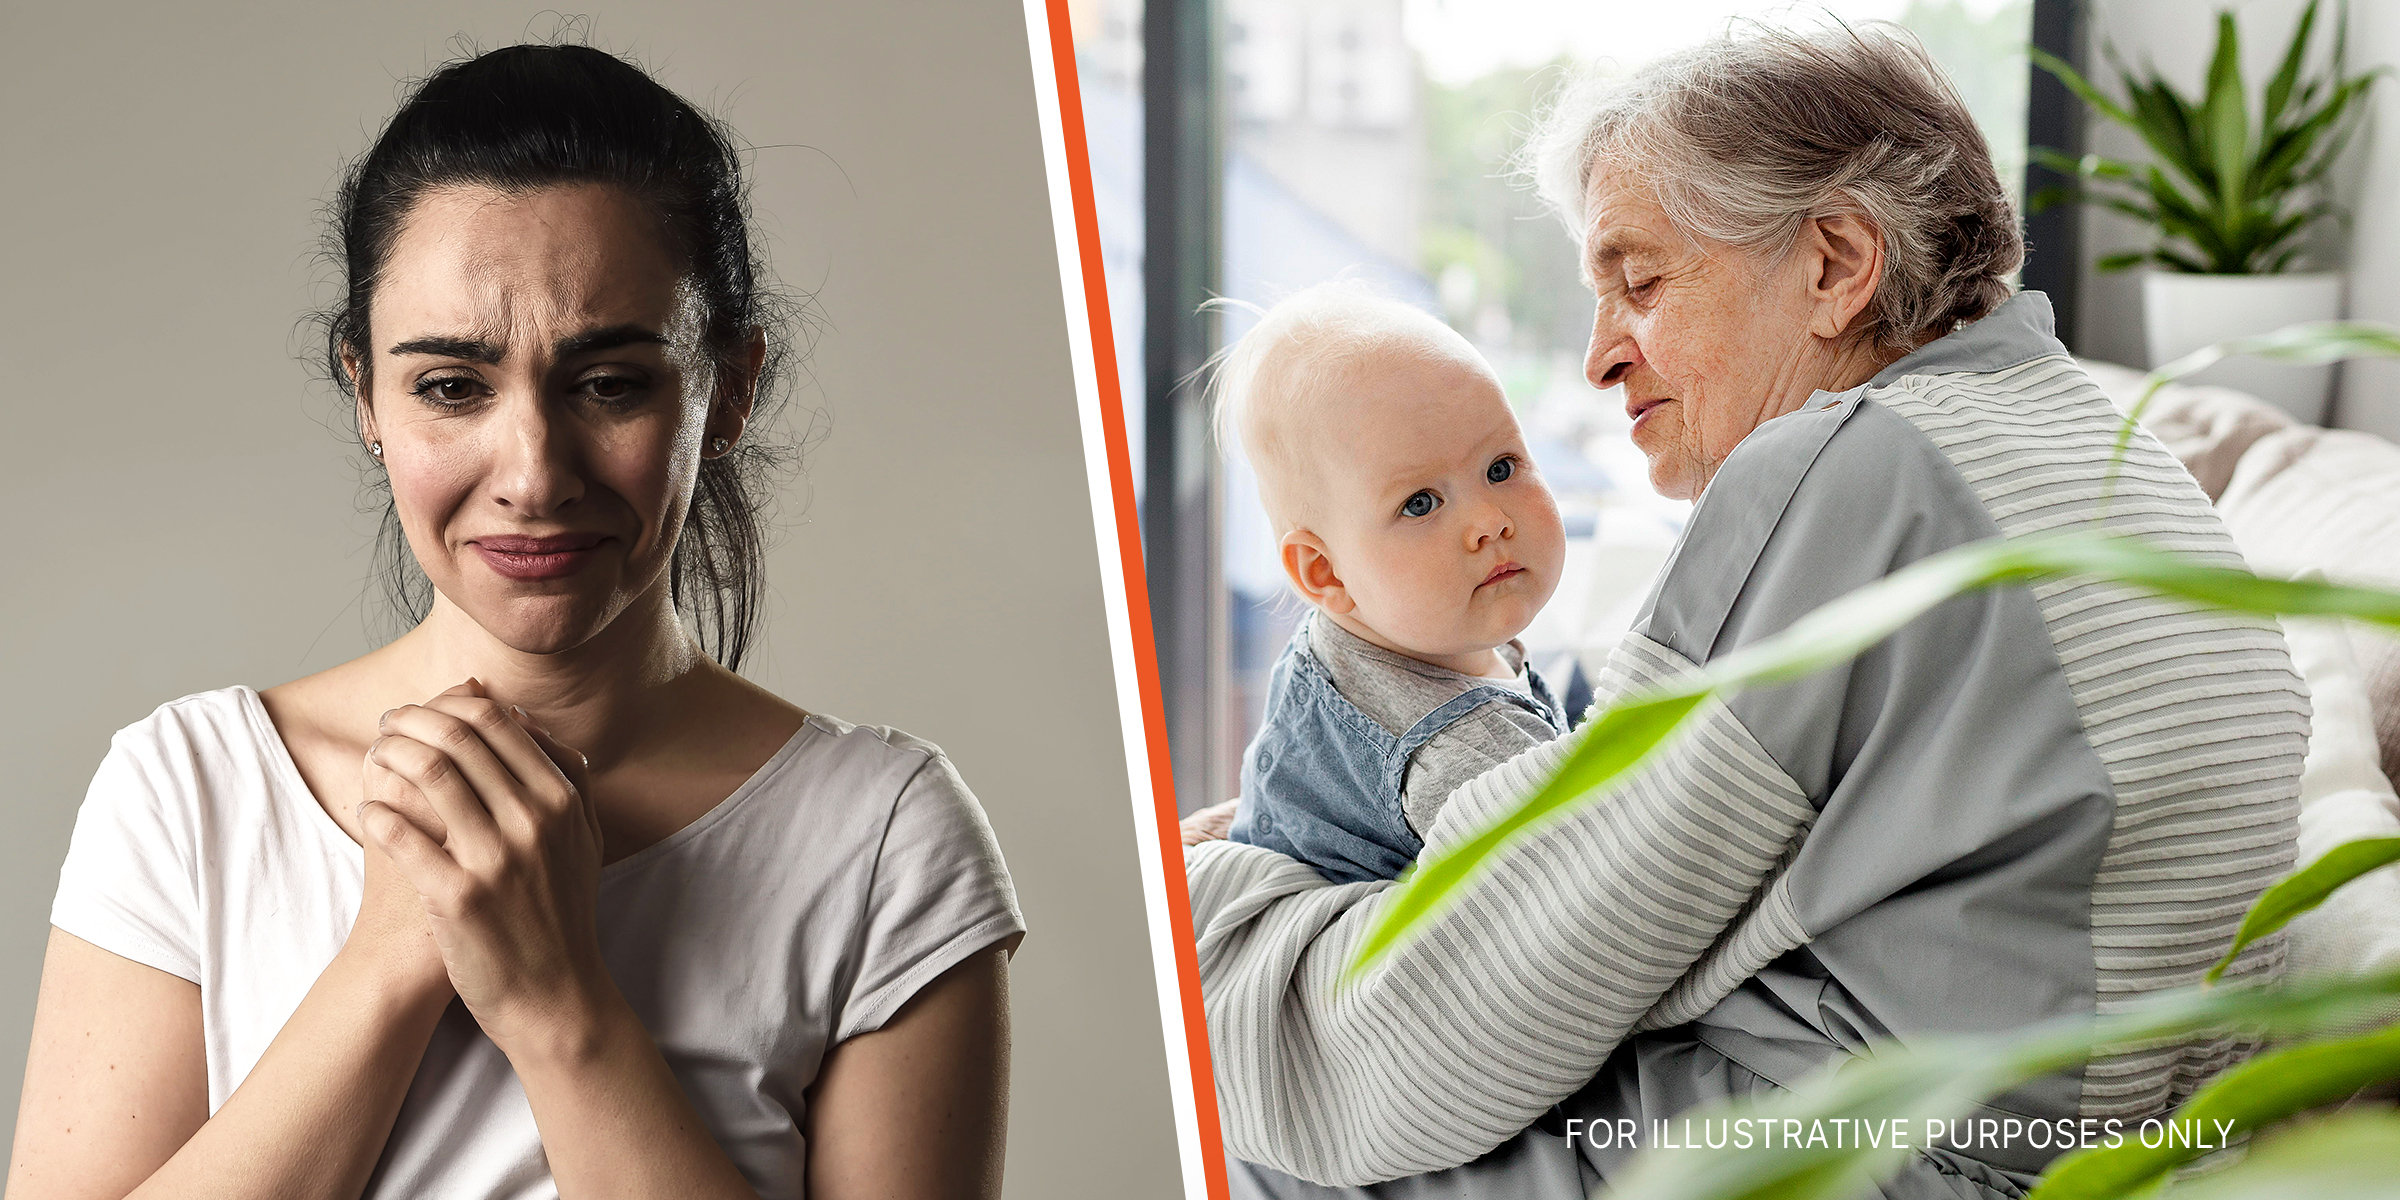 A woman in distress. | A baby boy and a grandparent. | Sources: Freepik | Shutterstock